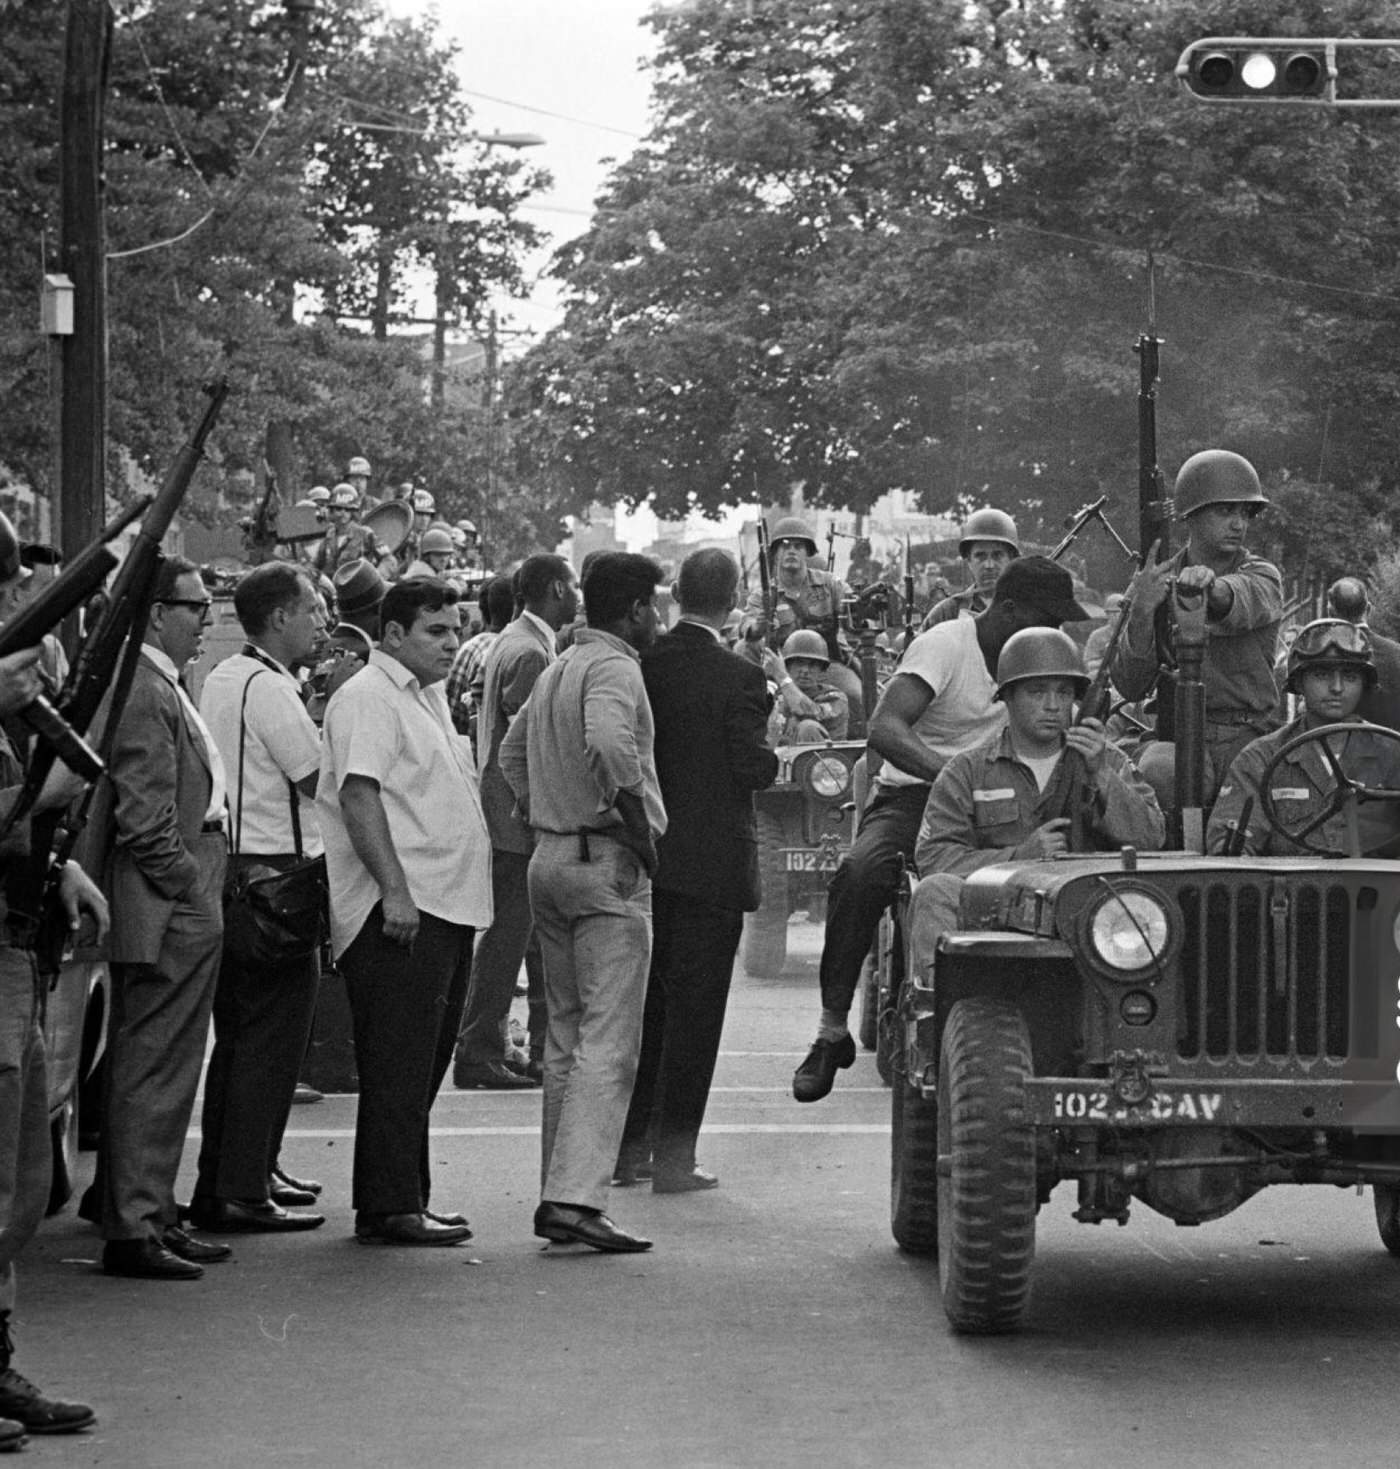 A regiment of the federal guard and state police driving jeeps in single file on an avenue